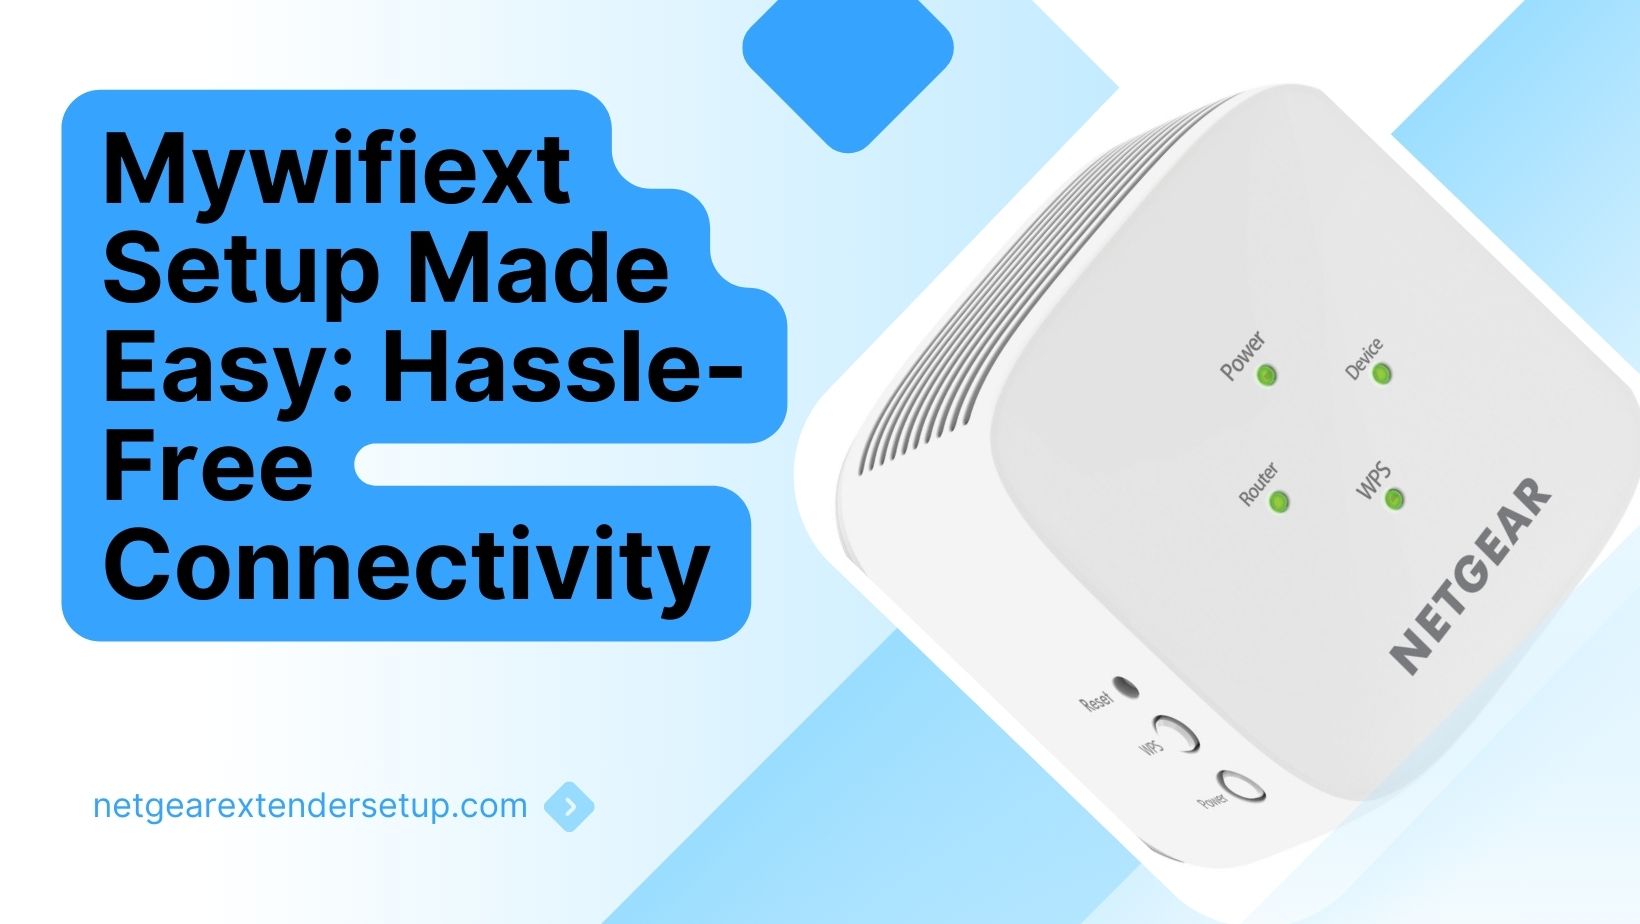 You are currently viewing Mywifiext Setup Made Easy: Hassle-Free Connectivity